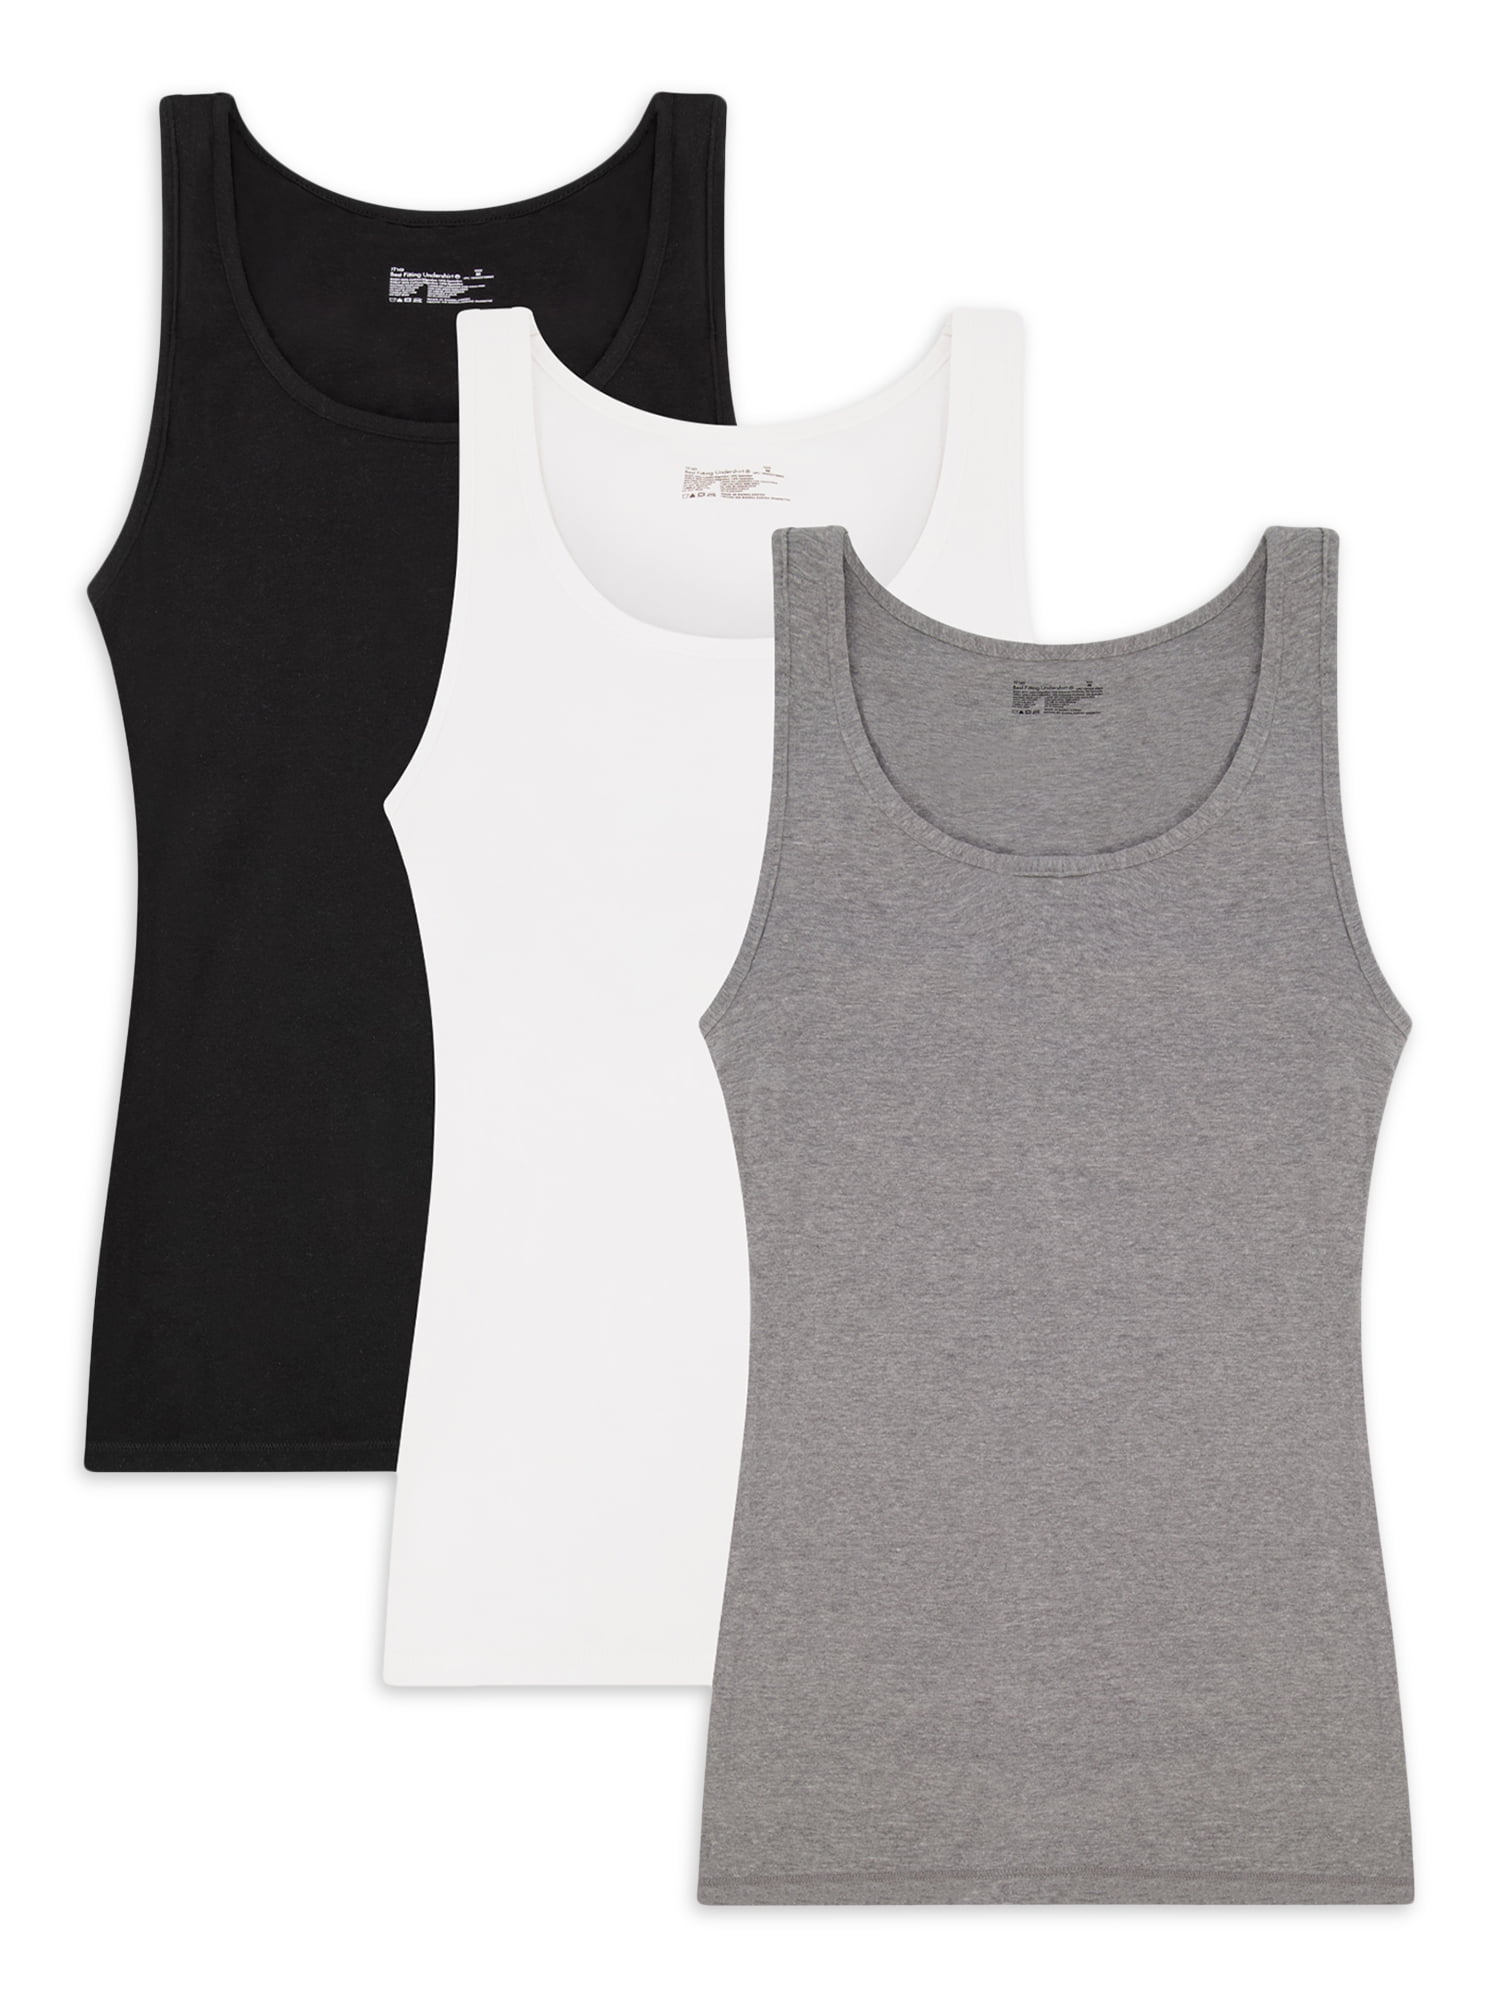 Best Fitting Panty Everyday Tank Top, 3 Pack - Walmart.com